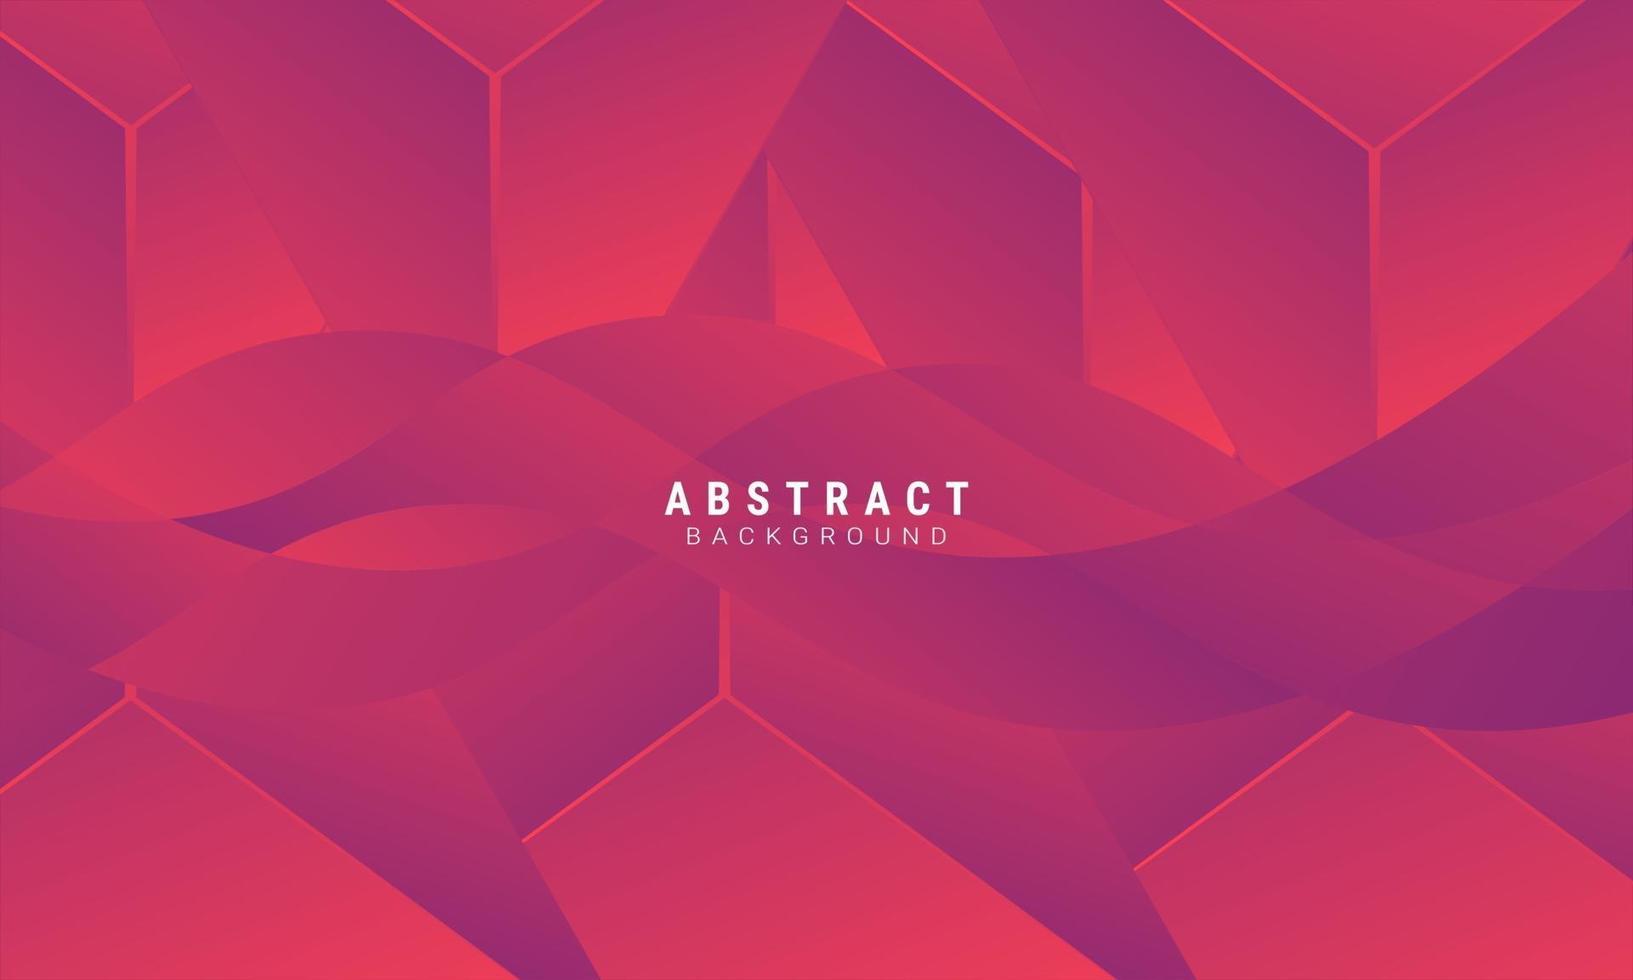 Abstract triangle pink and black background vektor vector